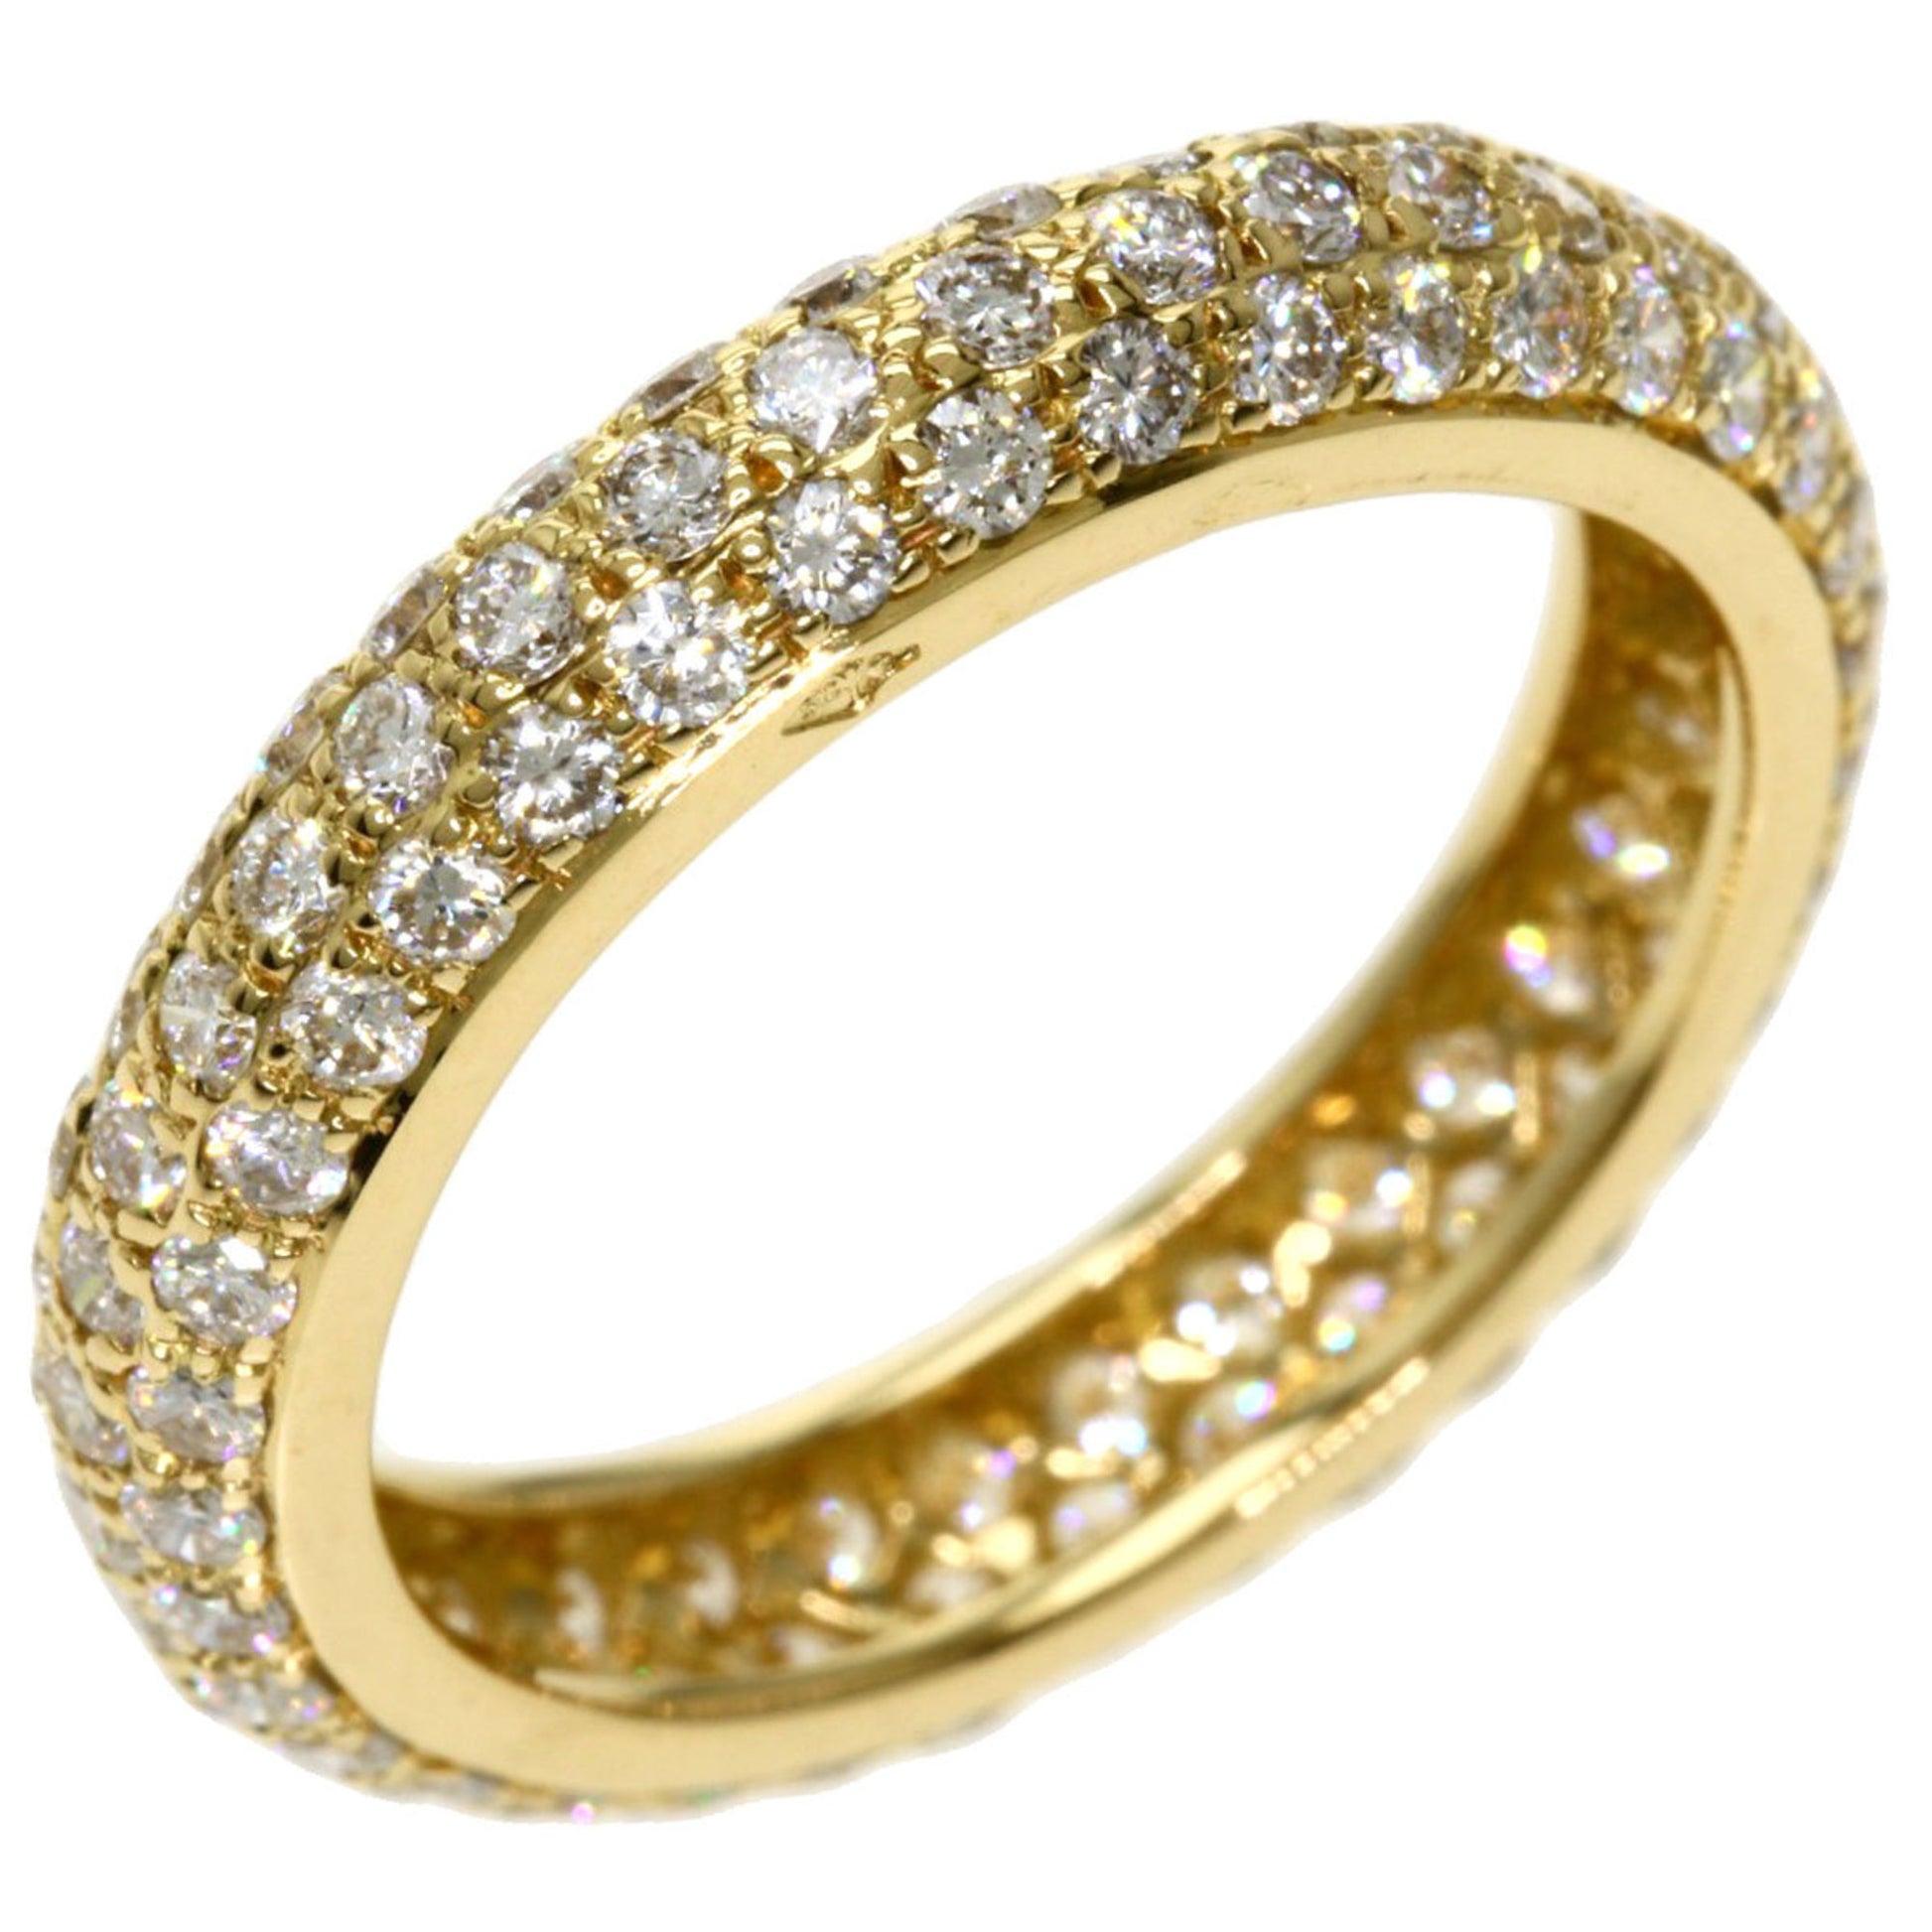 Cartier Pave Eternity Full Diamond Ring in 18K Yellow Gold In Good Condition For Sale In London, GB